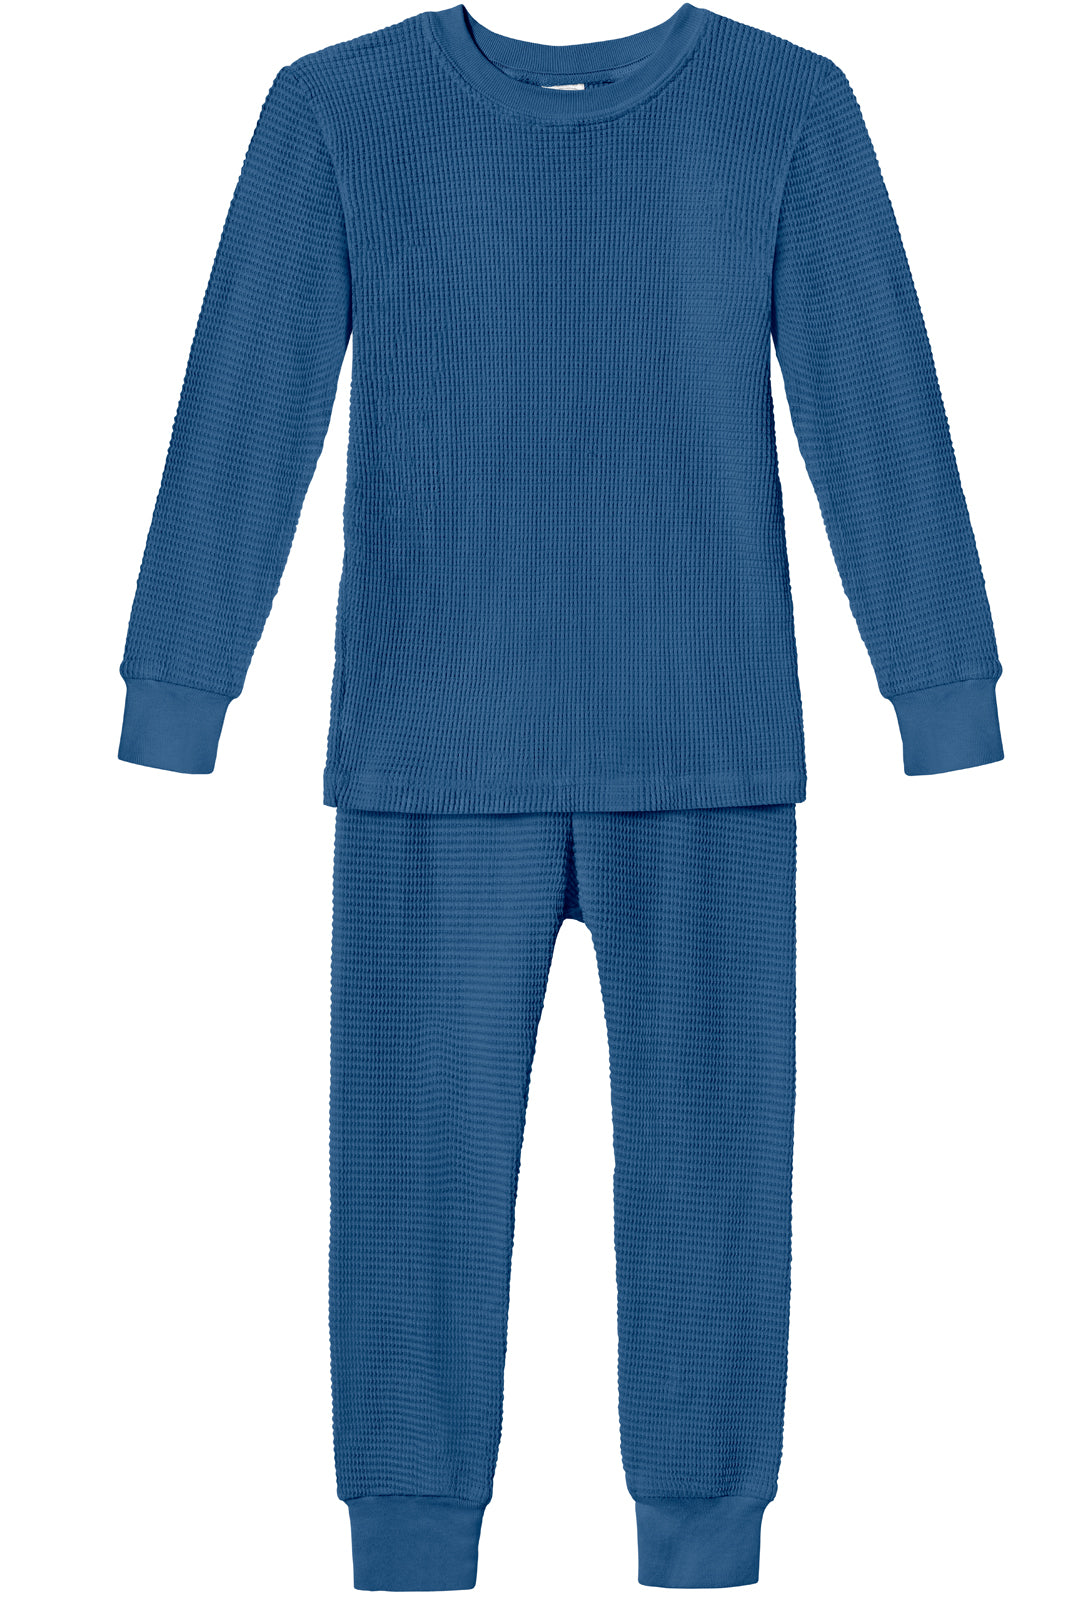  ONLY BOYS Thermal Underwear Set 2 Piece Waffle Knit Top and Long  Johns (2T-16), Size 3T, Dark Blue: Clothing, Shoes & Jewelry